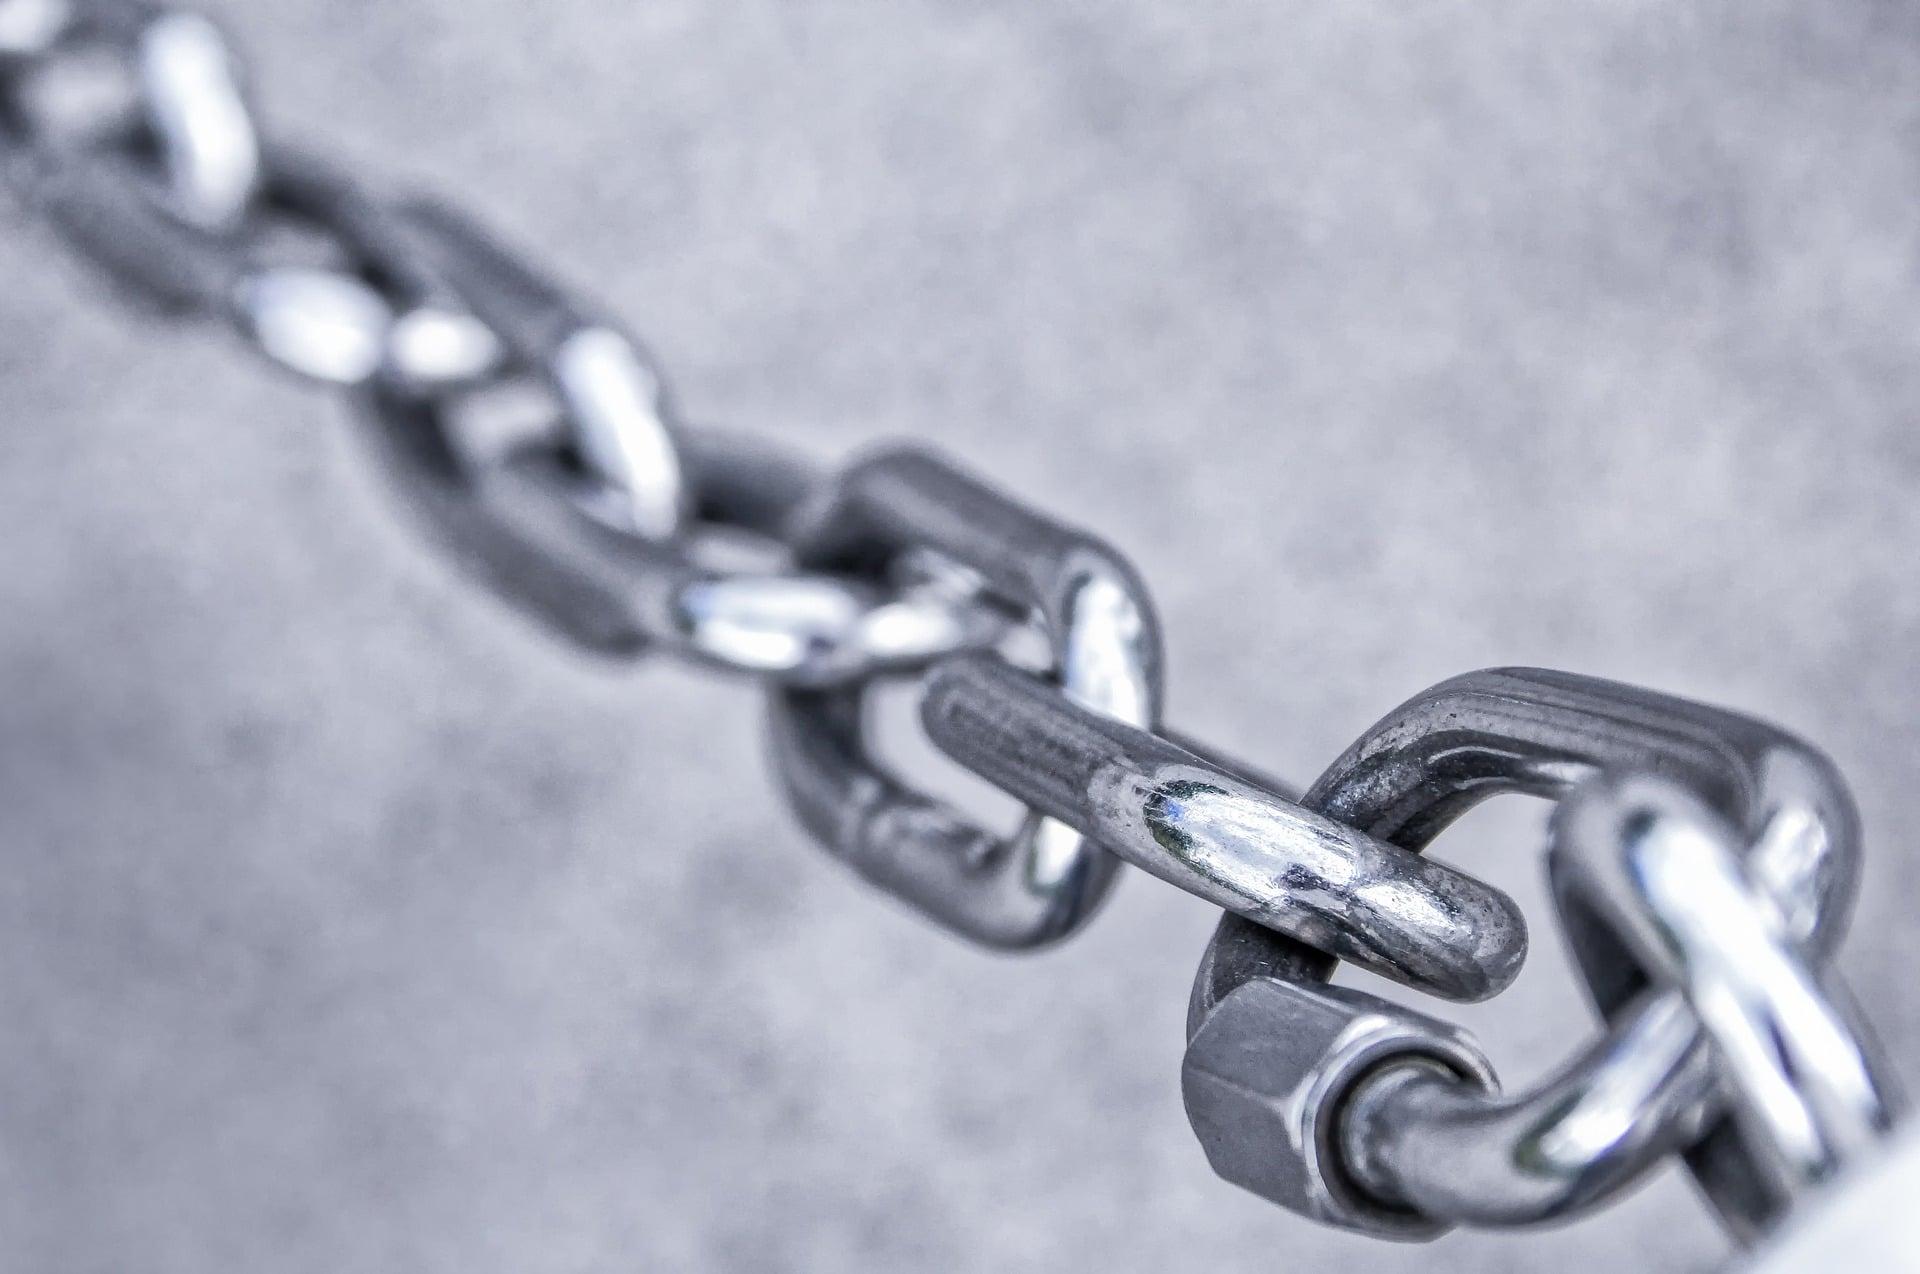 If you have toxic links pointing to your website, just ignore them